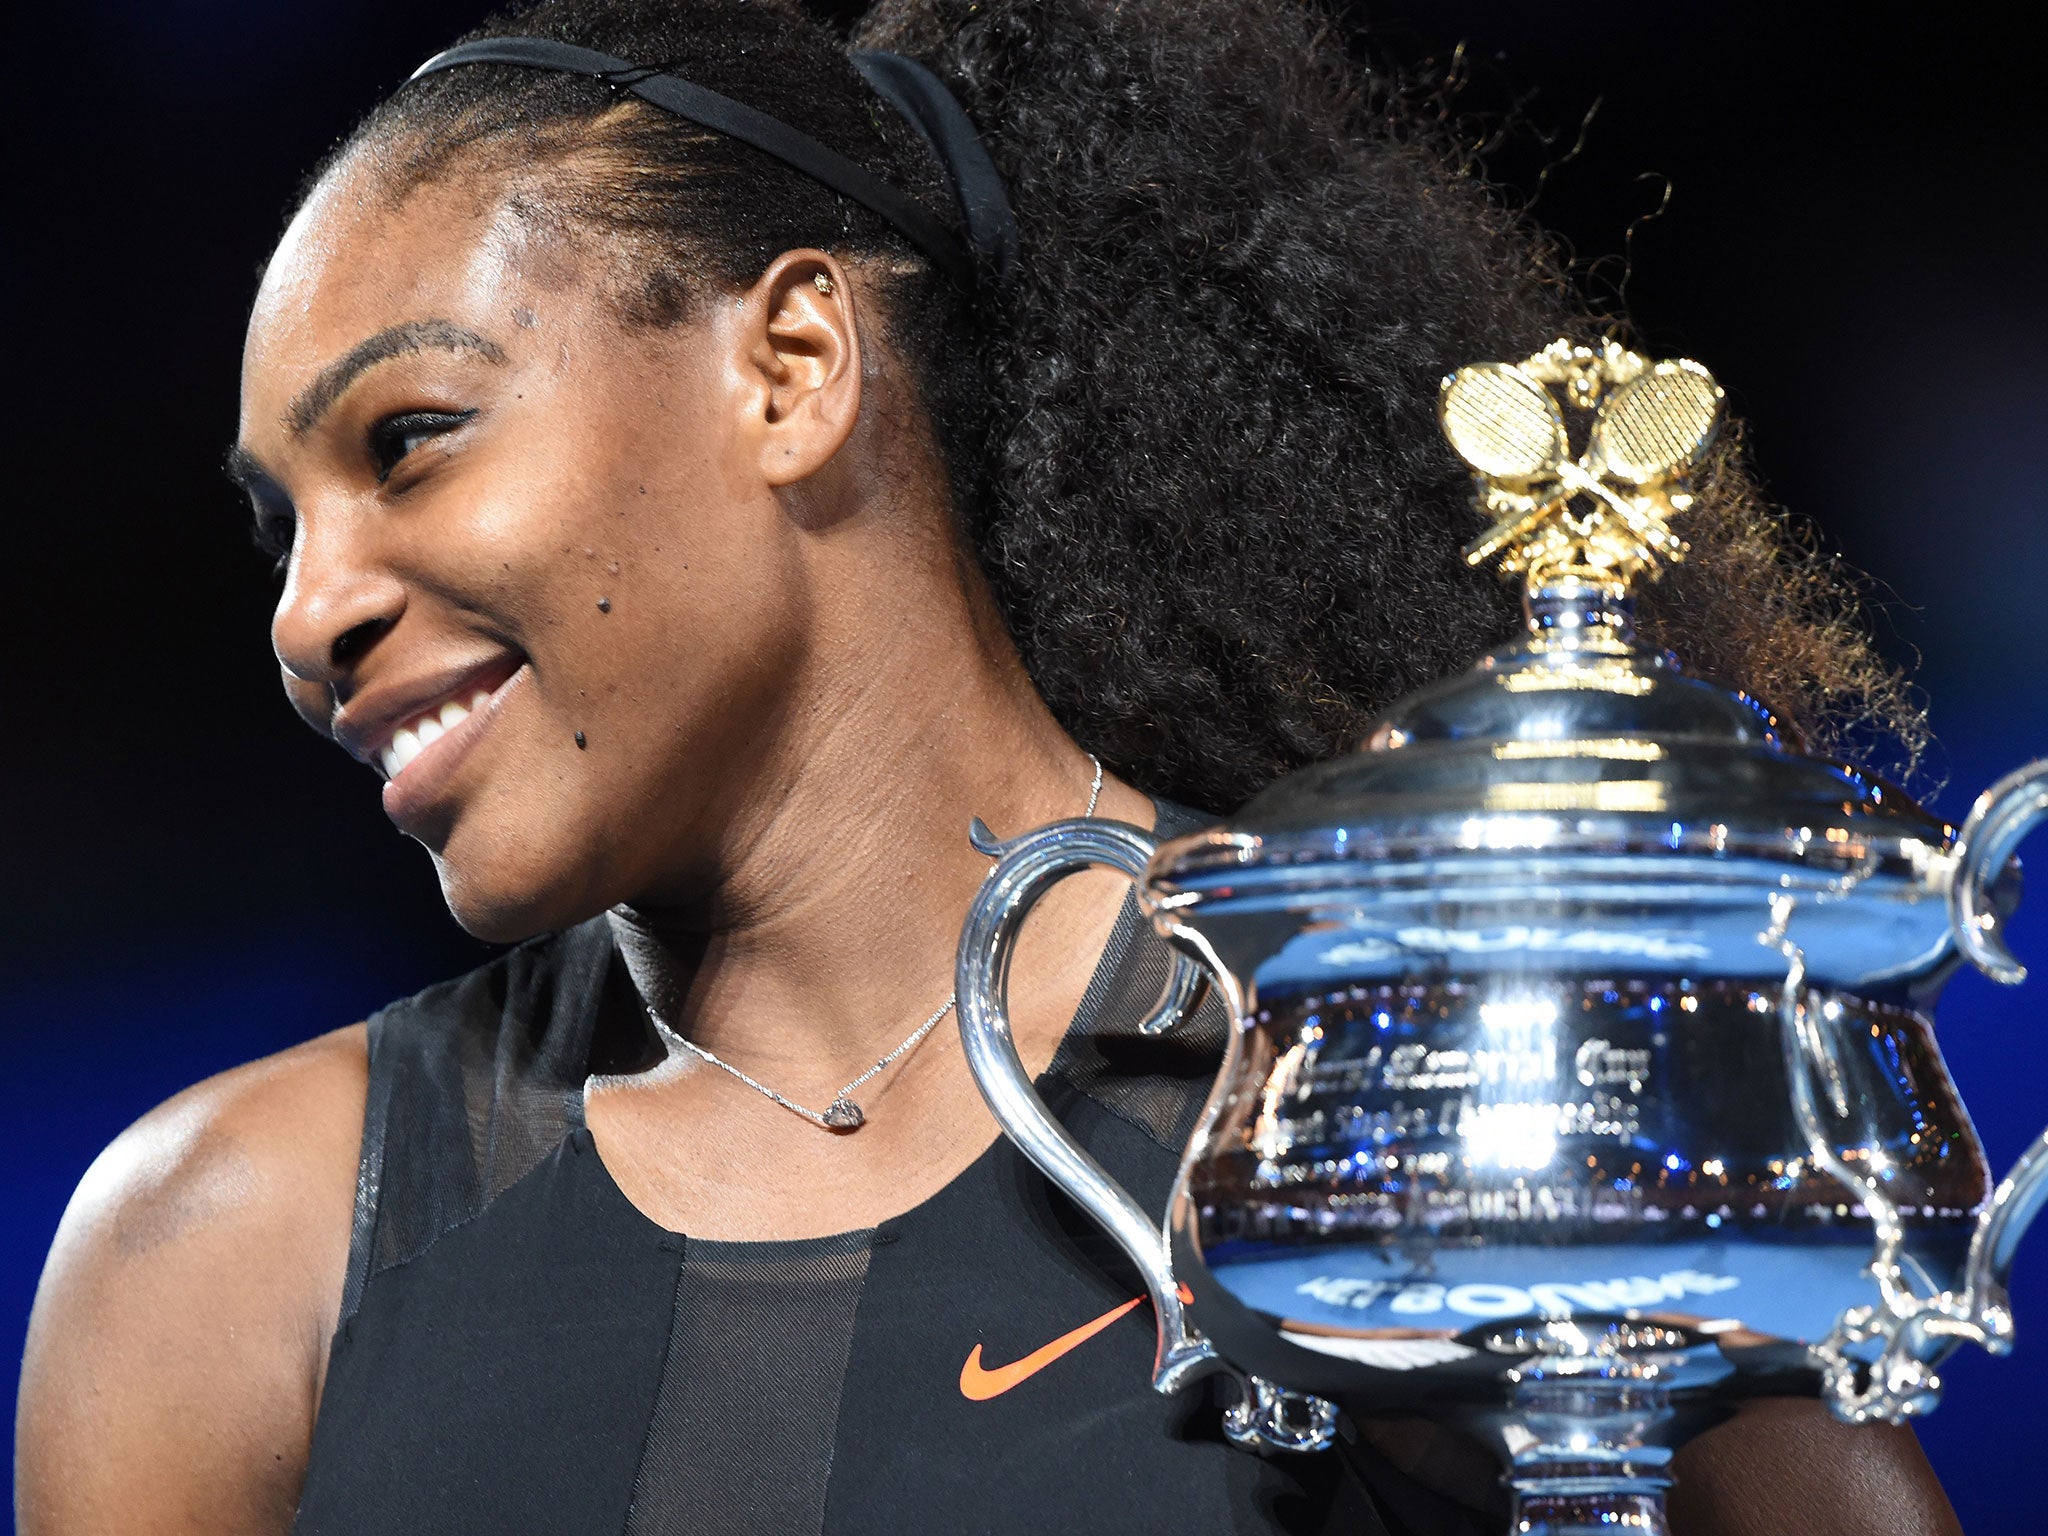 Serena Williams looks set to defend her Australian Open title in January